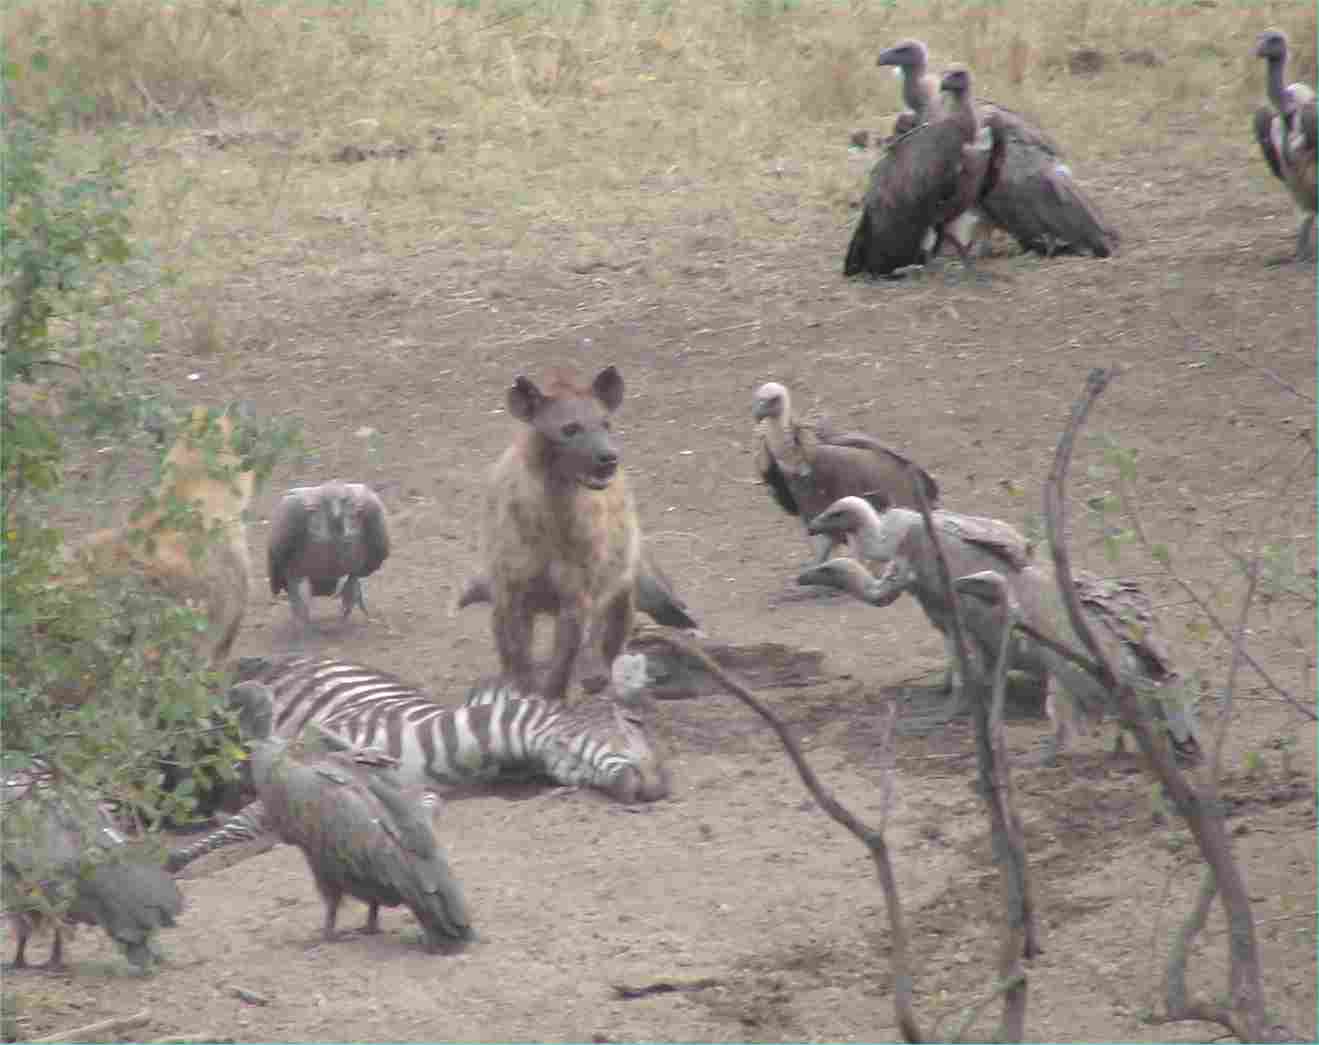 The hyenas eat first, then the vultures.  Photo by FG, Dec. 2005.